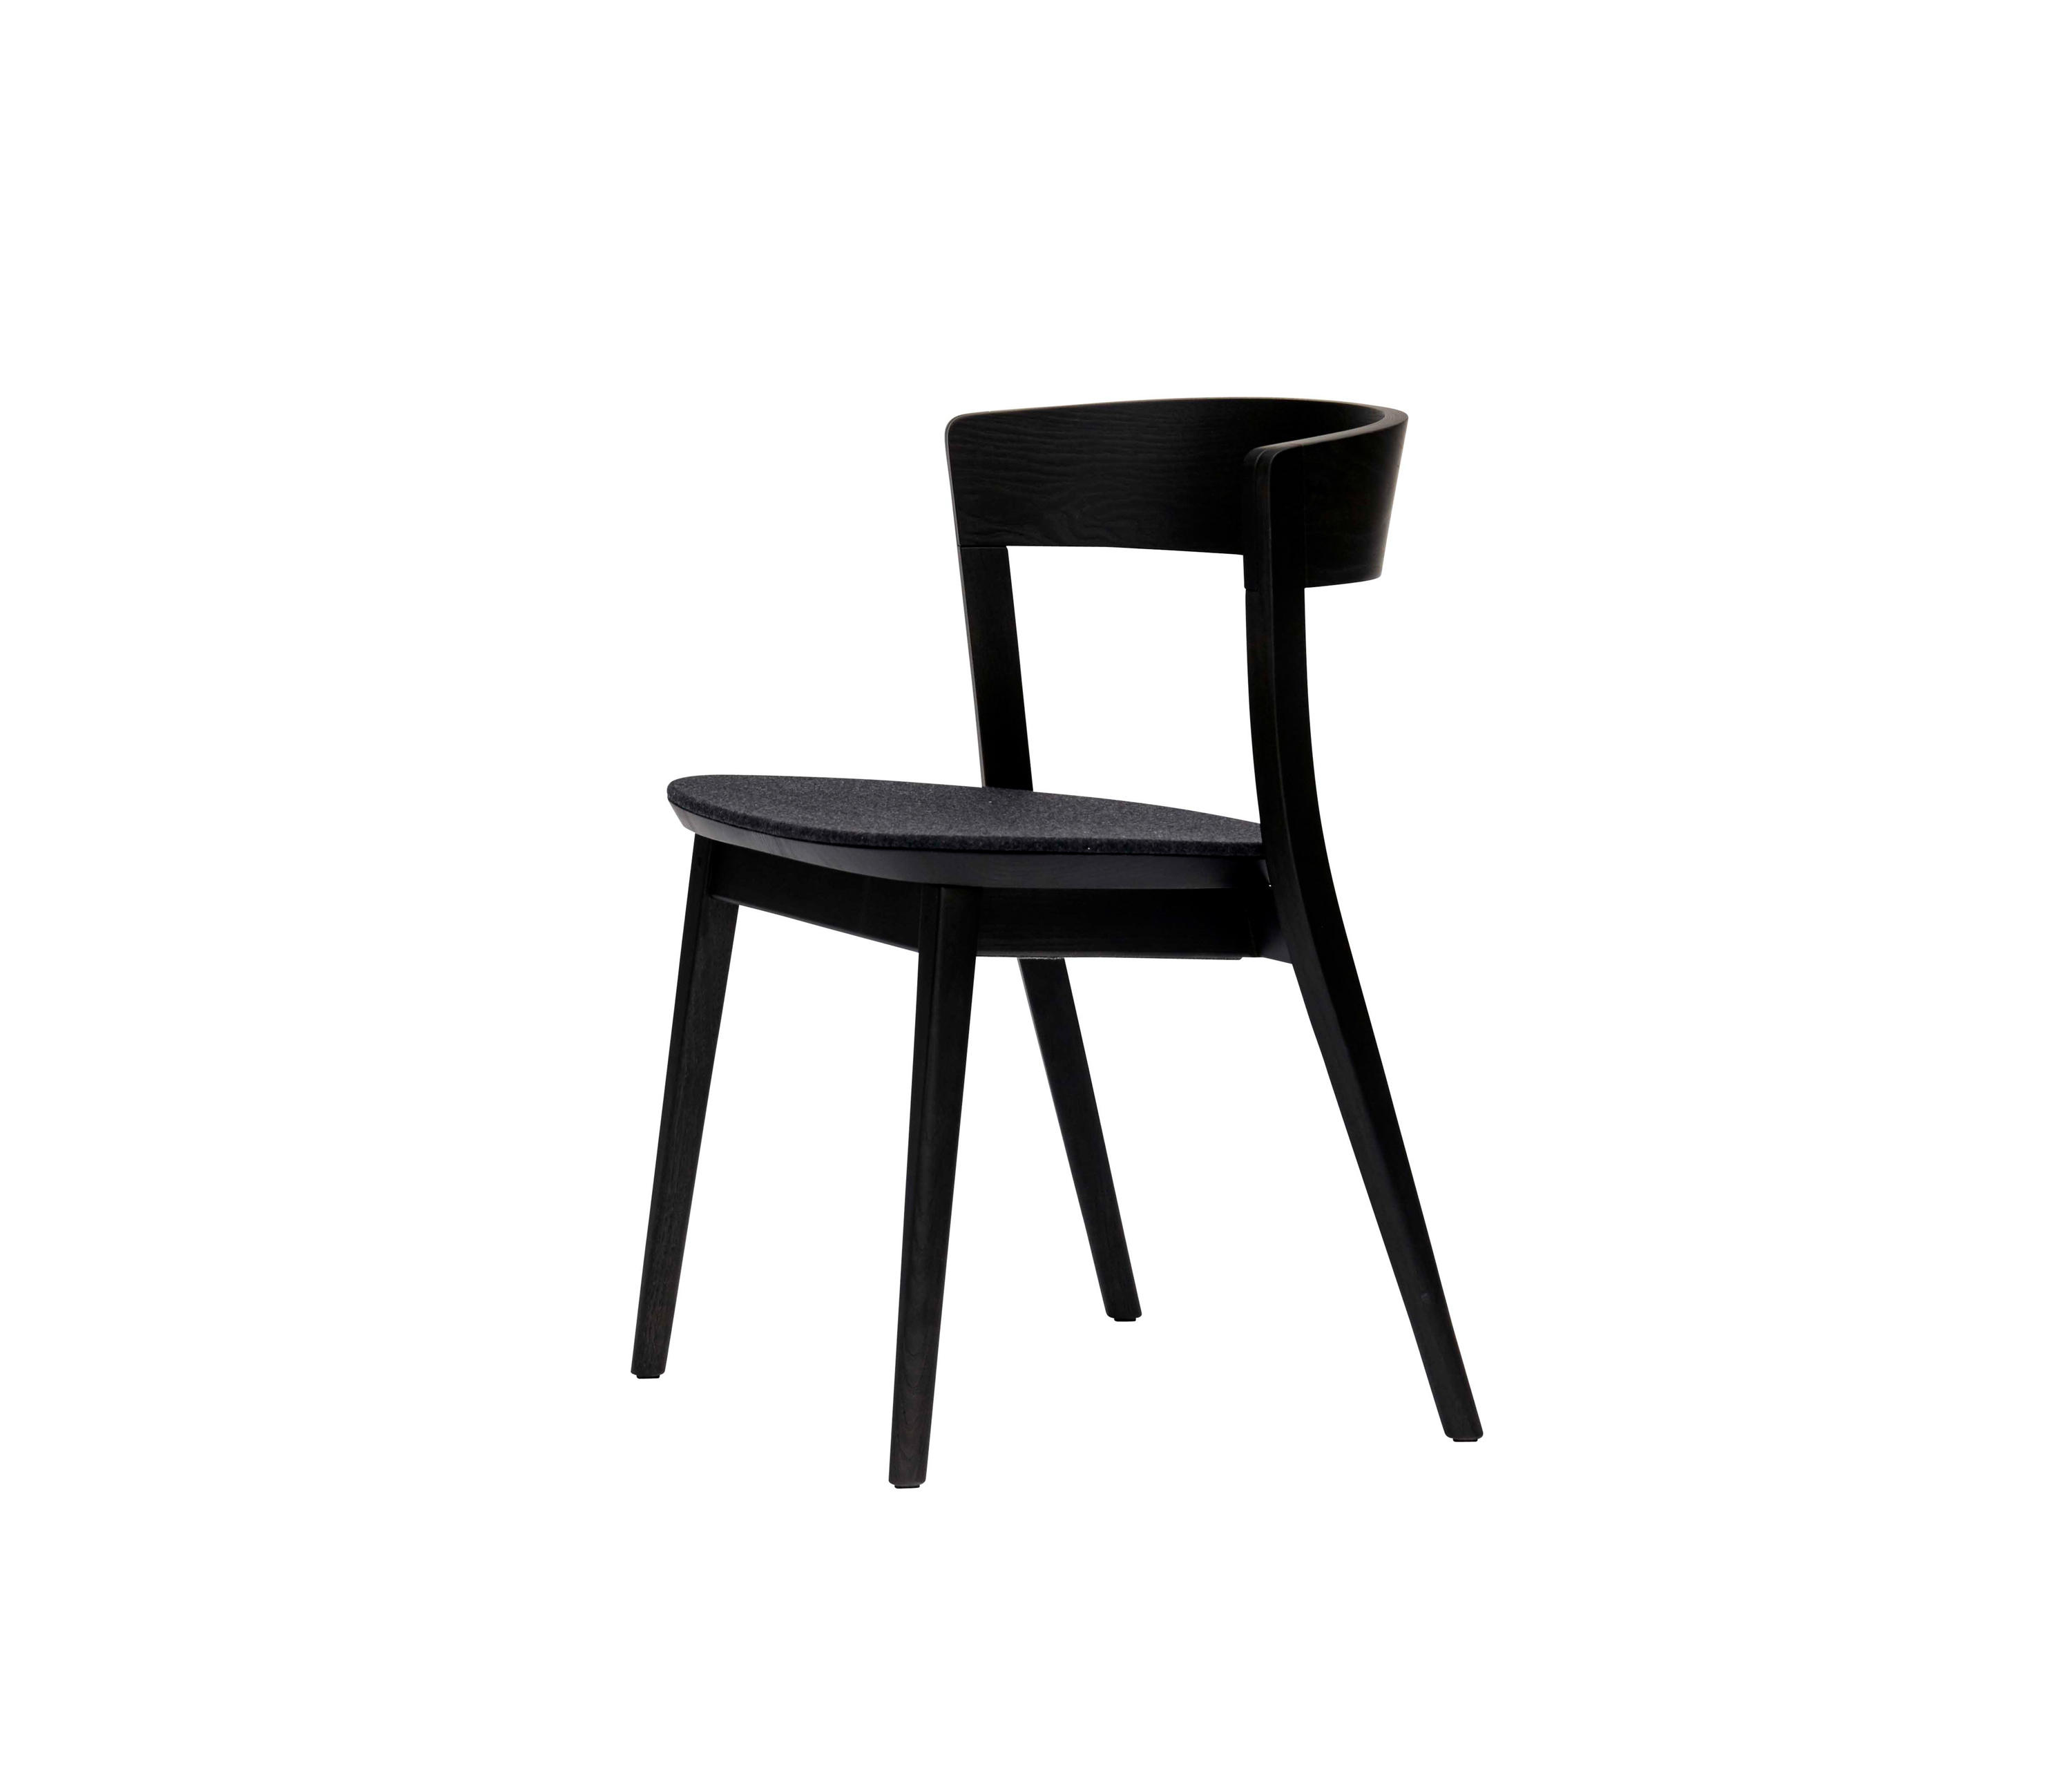 CLARKE - Chairs from SP01 | Architonic